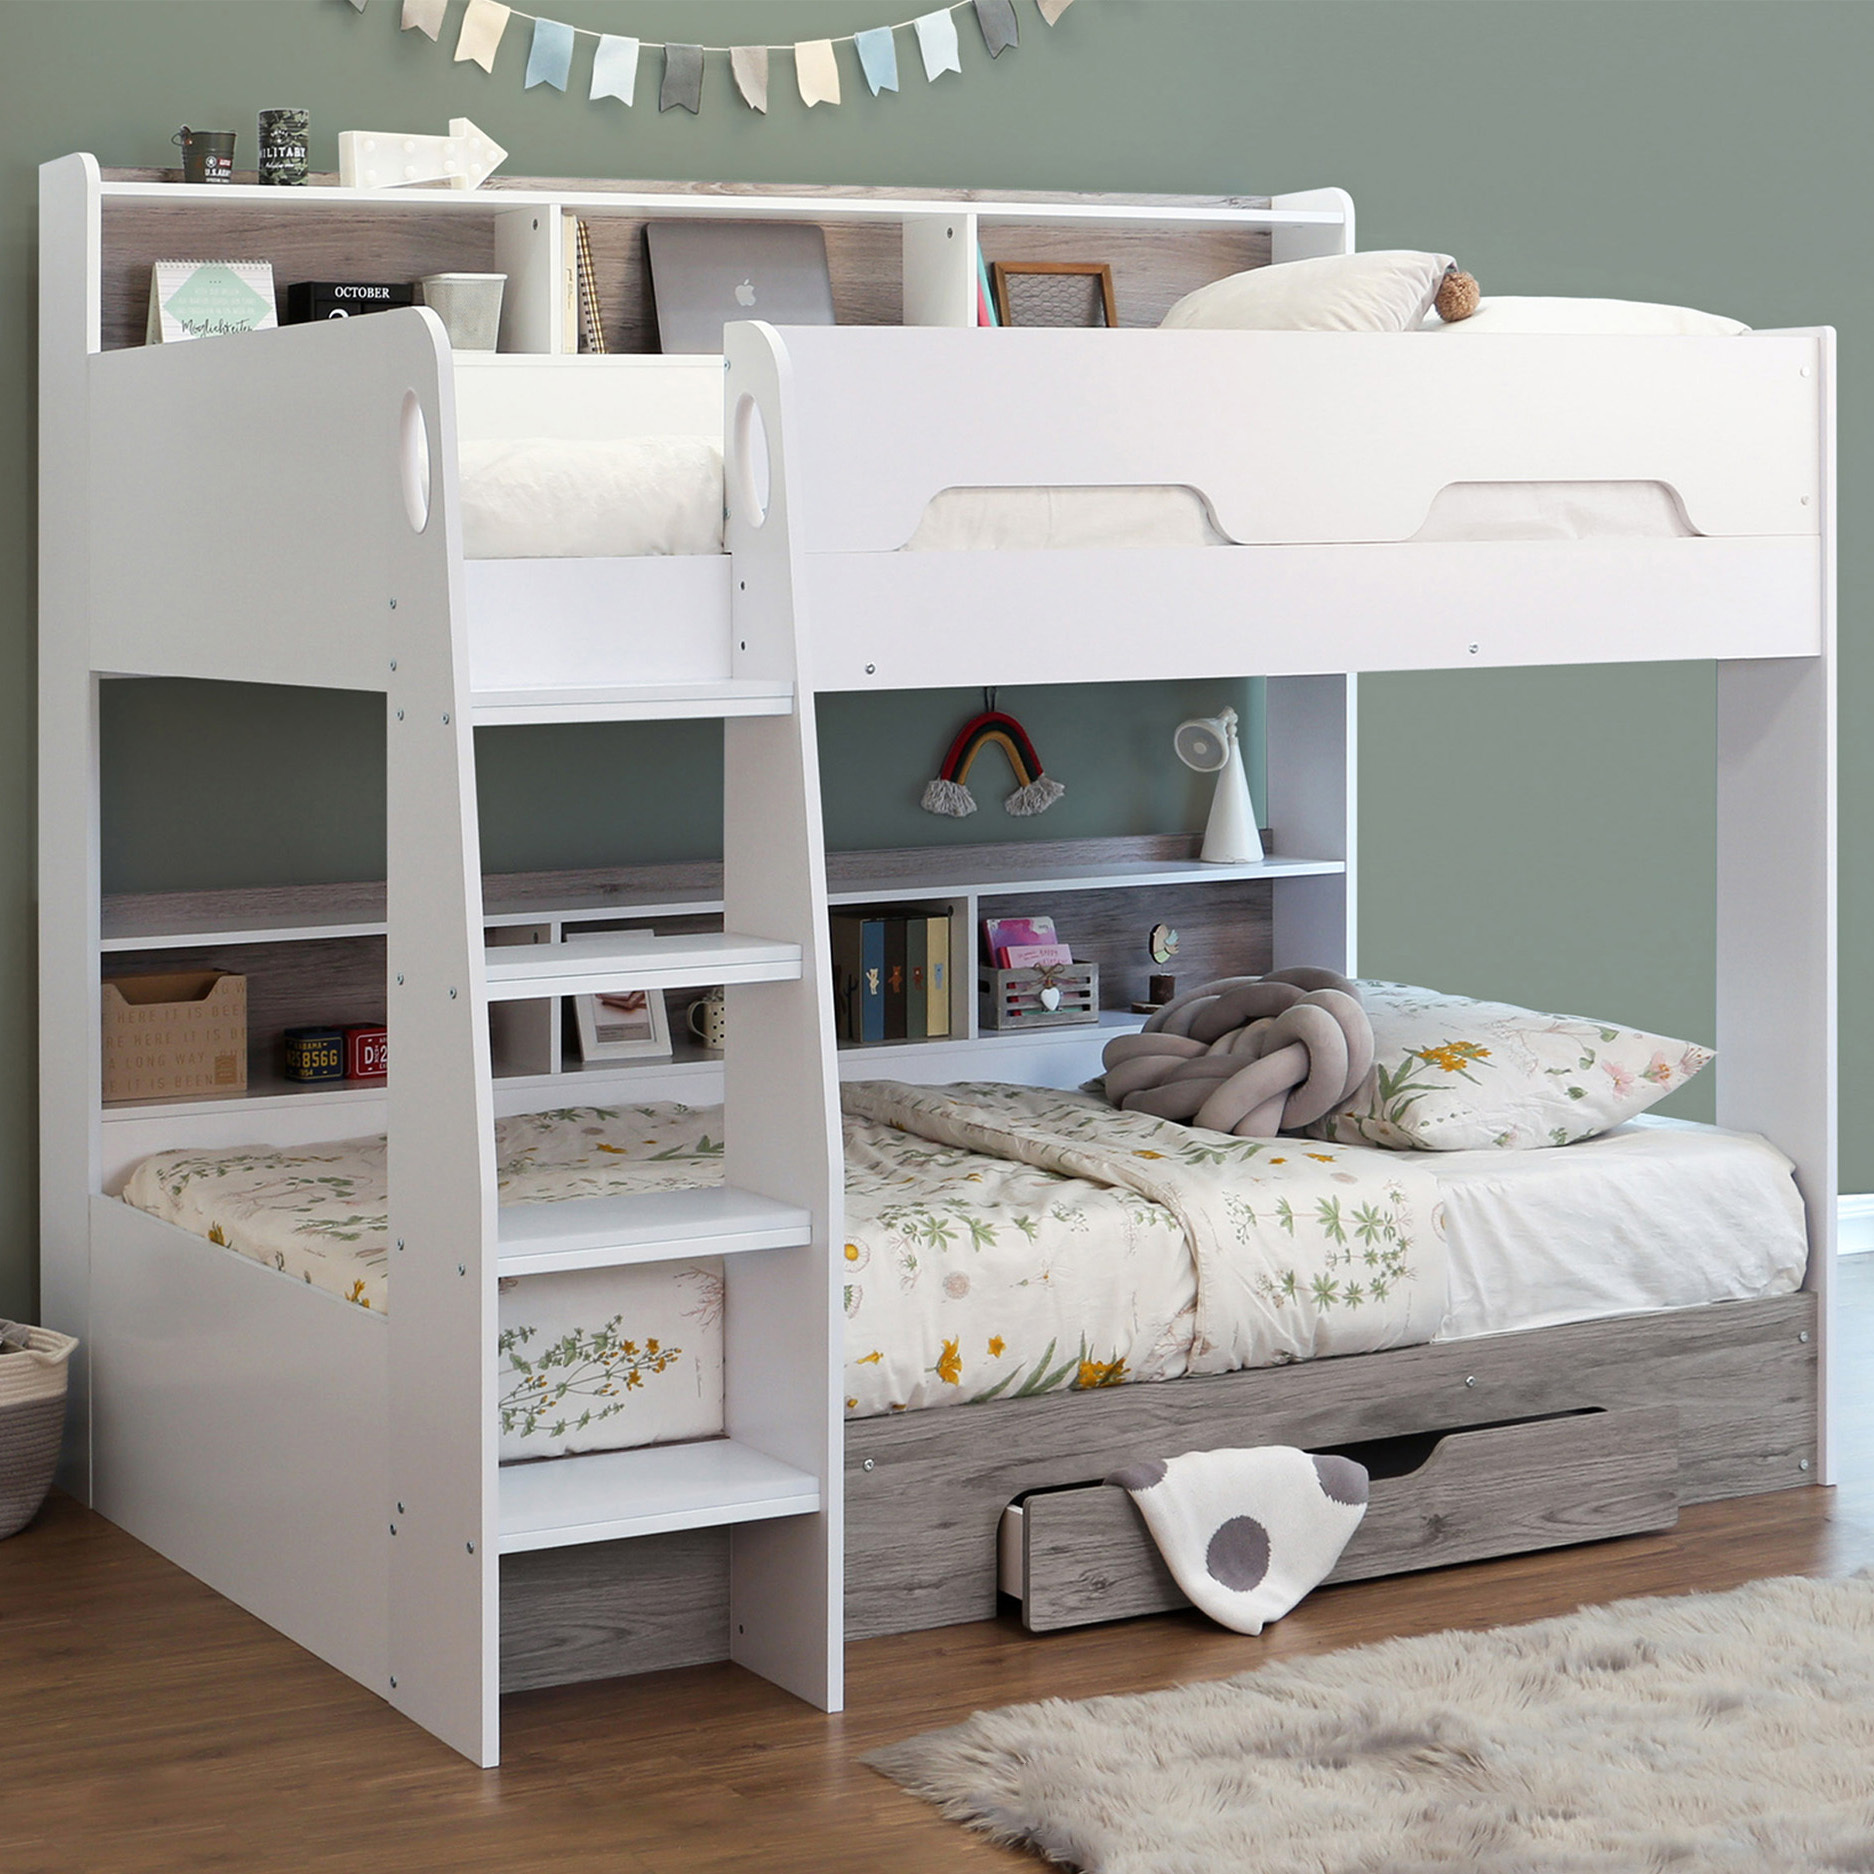 Vic Furniture Castel Single Bunk Bed, A Picture Of A Bunk Bed